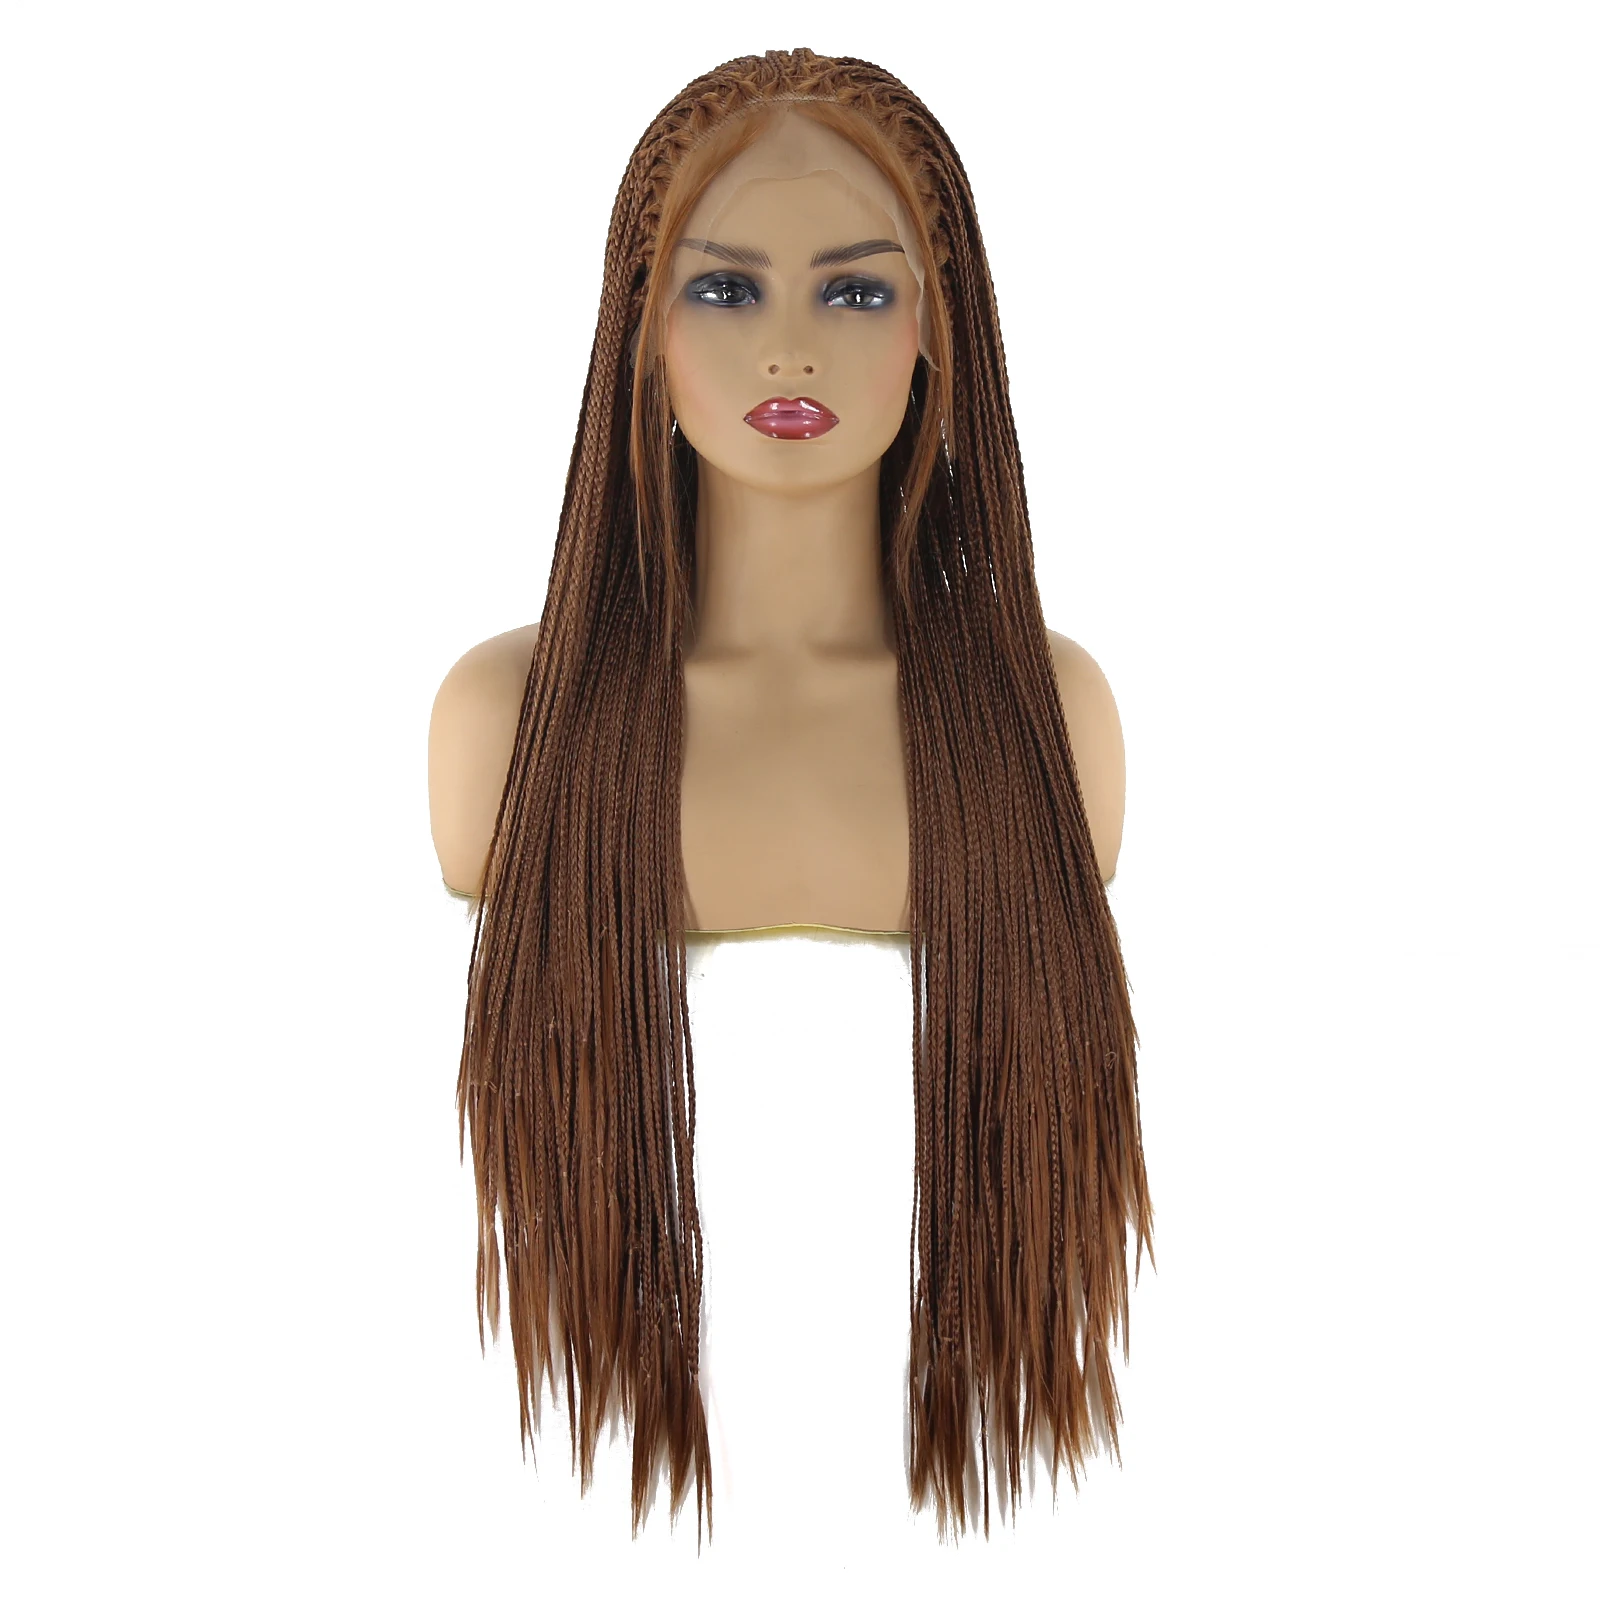 BTWTRY Micro Braided Wigs Brown #30 Color Braid Synthetic Lace Front Wig Glueless Heat Resistant Fiber Wig for Women Daily Wear